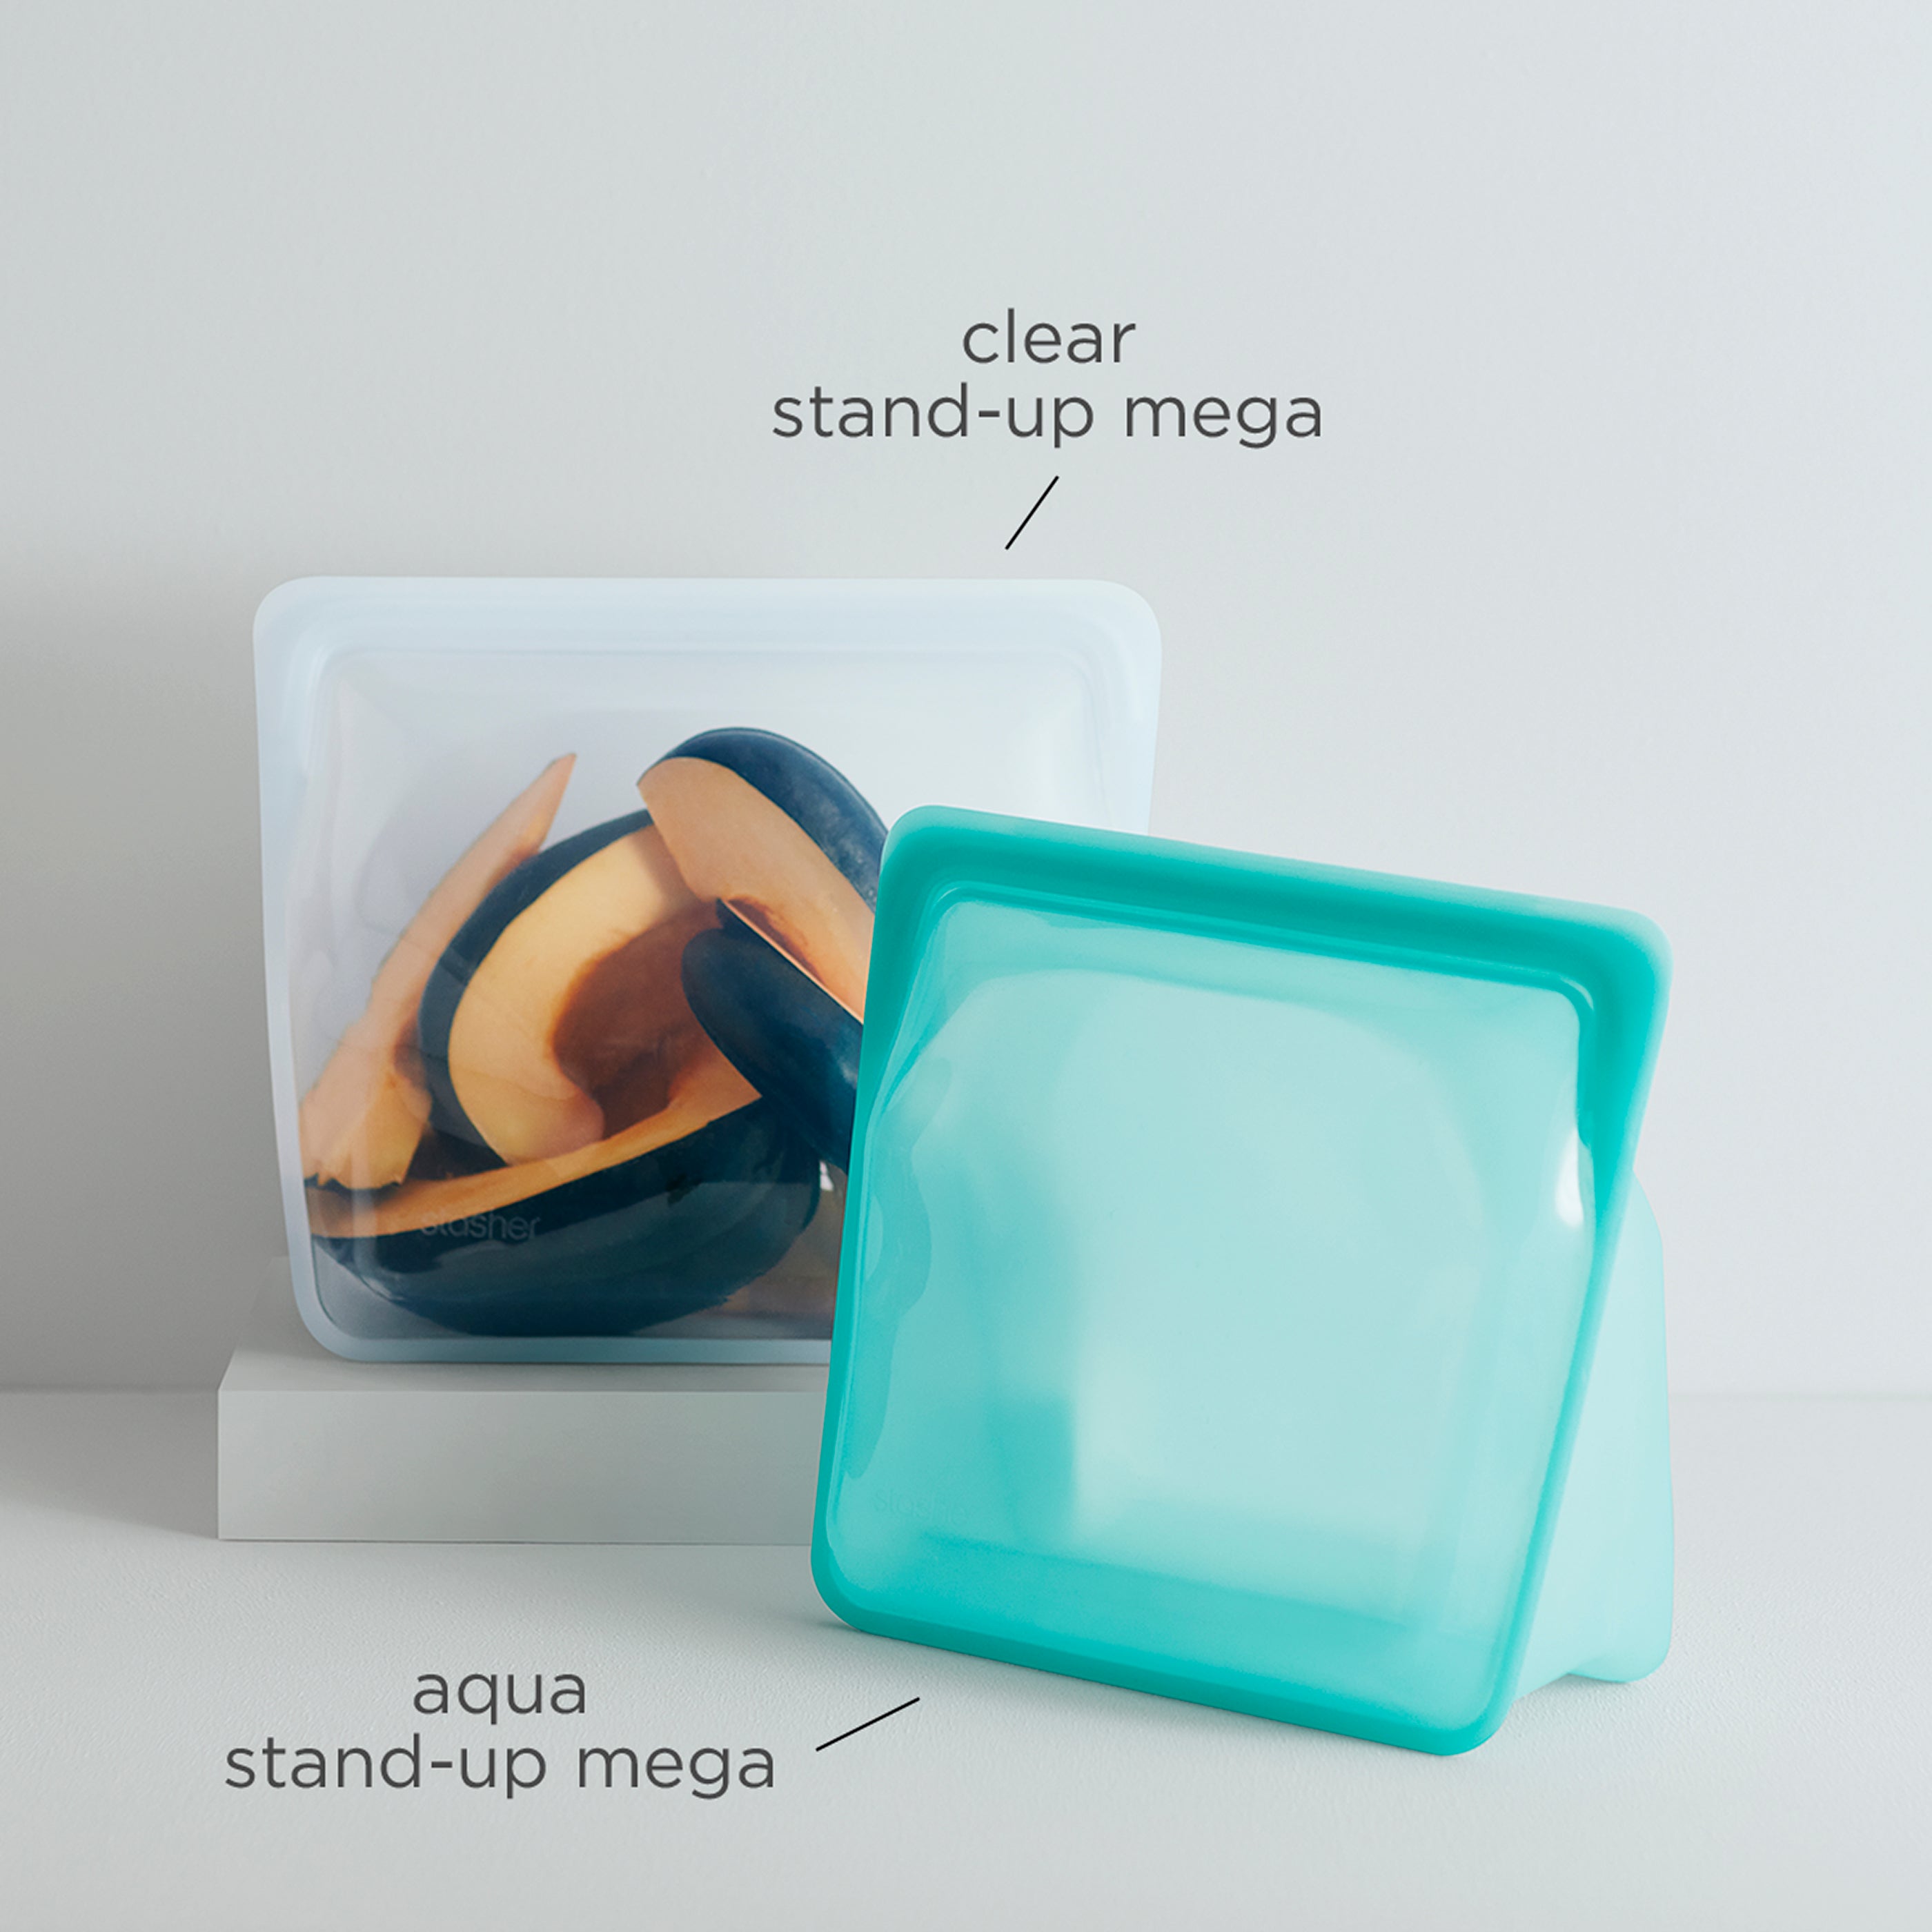 Stasher Stand-Up Mega Bags